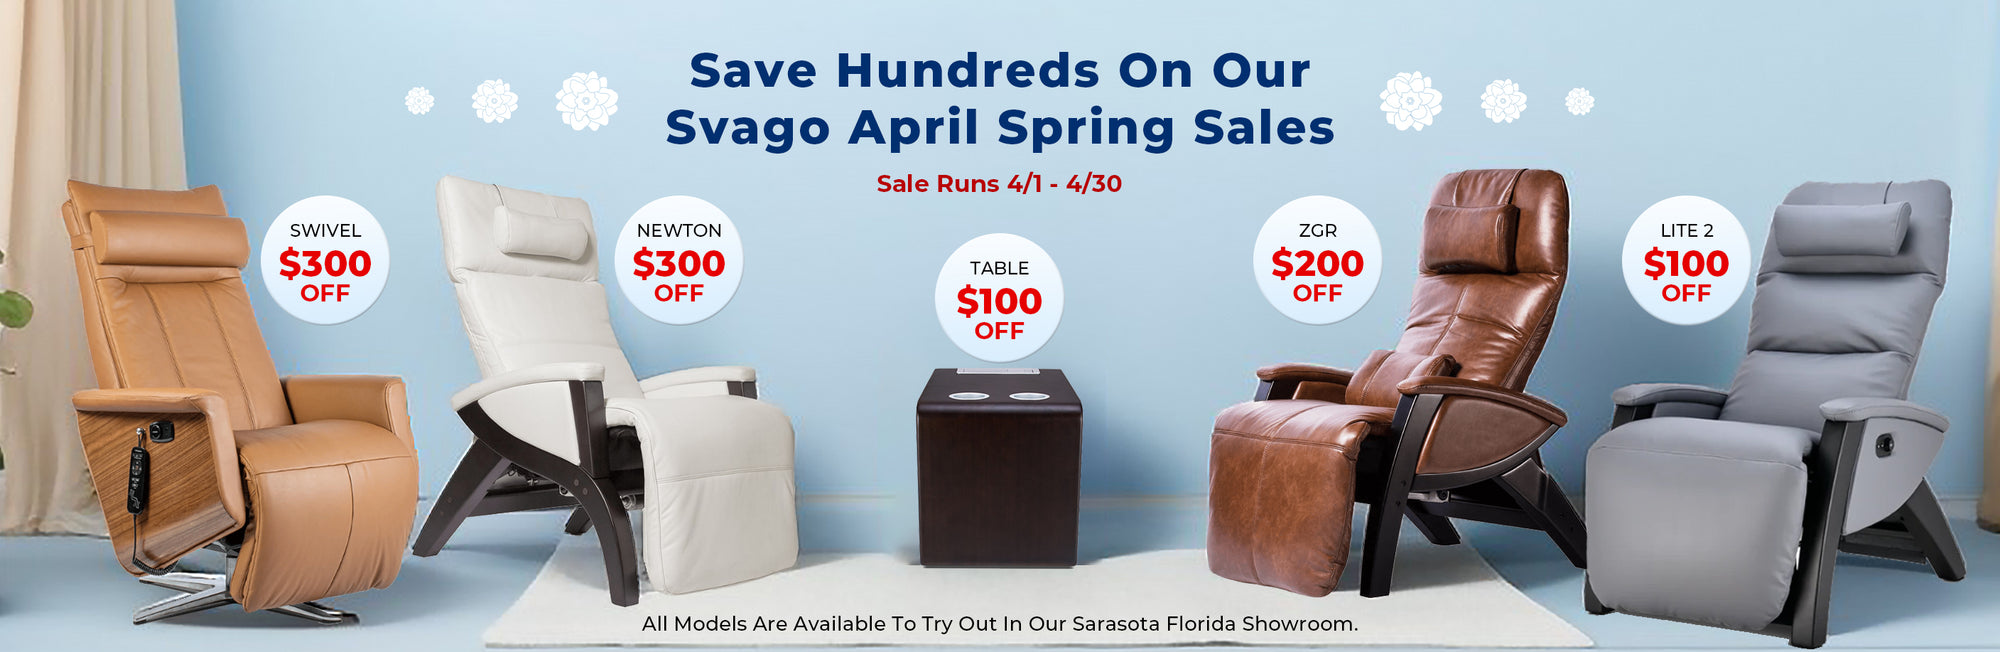 All Svago zero gravity recliners are on sale during our Spring Sales Event.